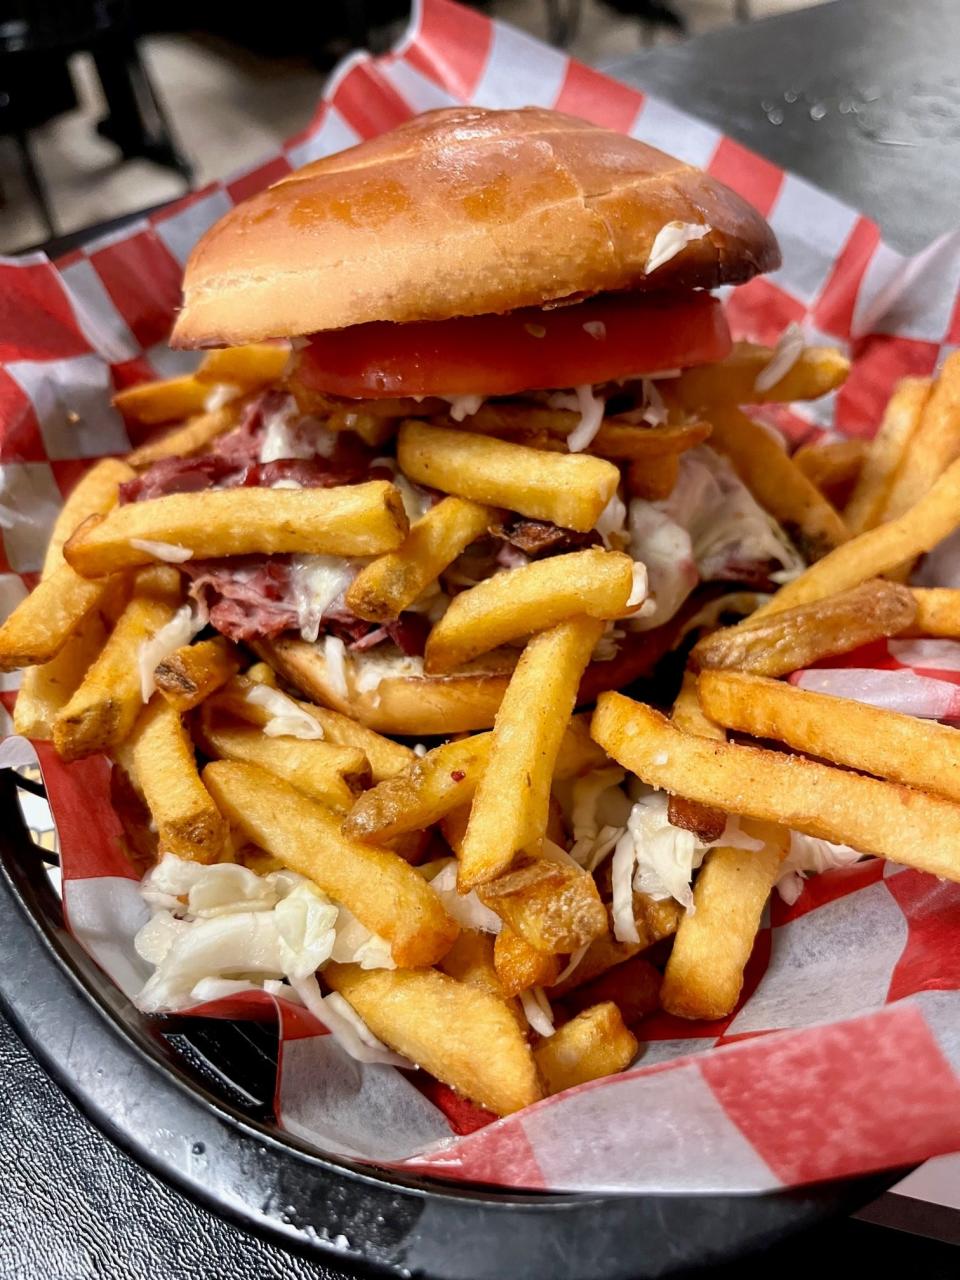 The Pittsburgh-style sandwich at Lelulo's Pizzeria in Cape Coral is piled high with meat, fries and coleslaw.